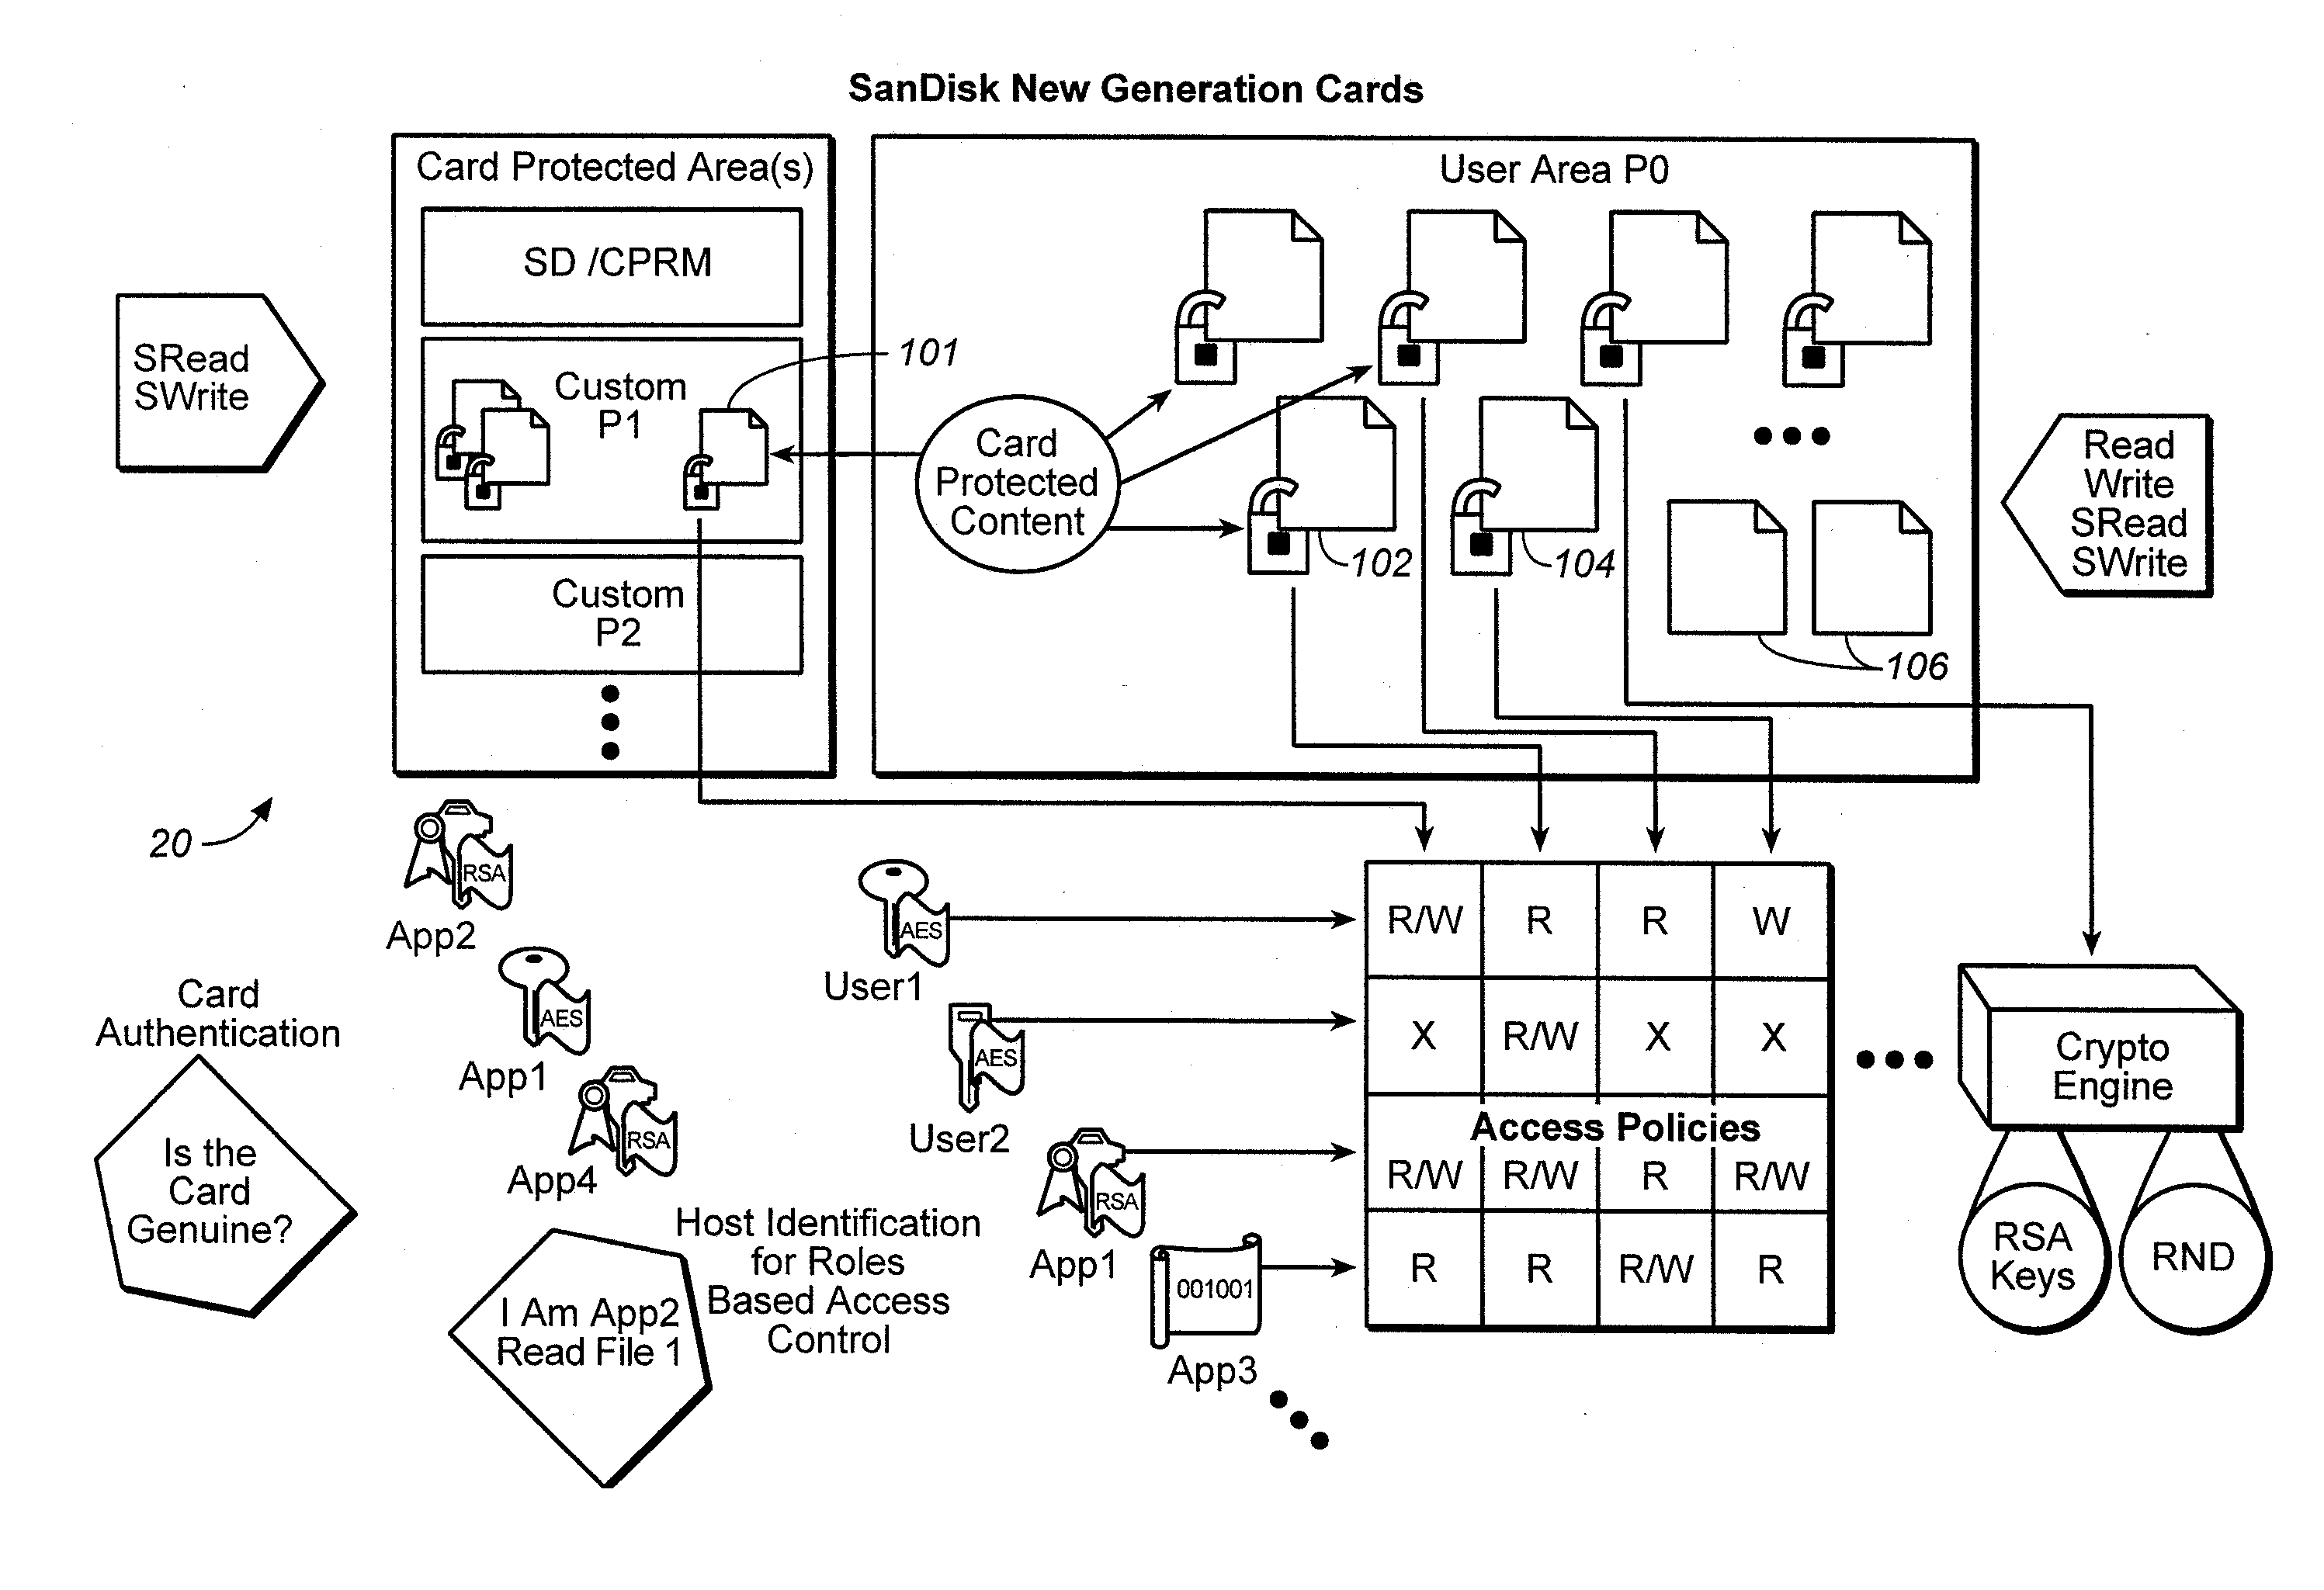 Memory system with versatile content control